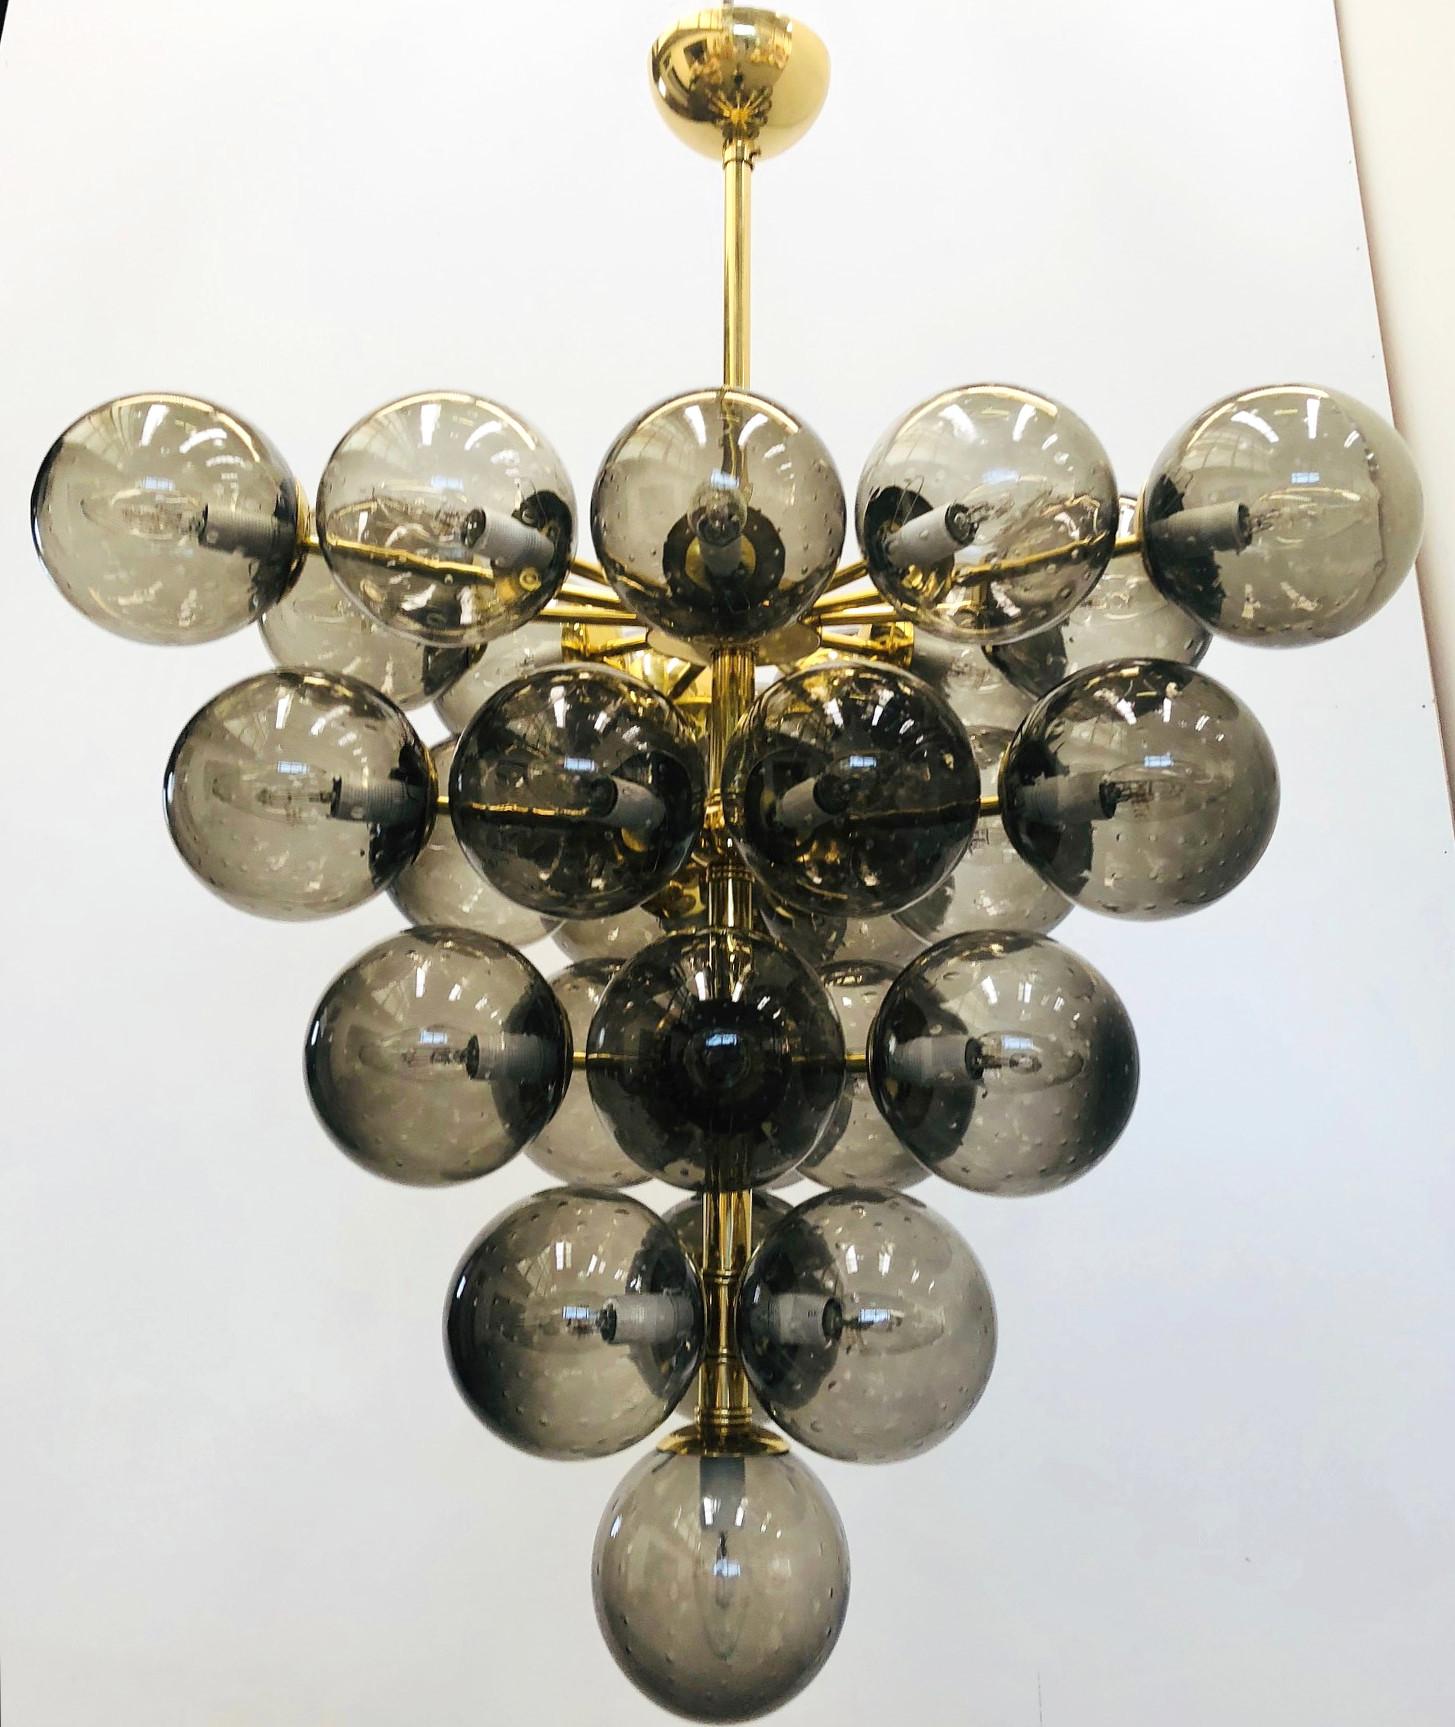 Italian chandelier with smoky Murano glass globes hand blown with bubbles inside the glass using Bollicine technique, mounted on polished brass frame / Designed by Fabio Bergomi for Fabio Ltd / Made in Italy
31 lights / E12 or E14 type / max 40W